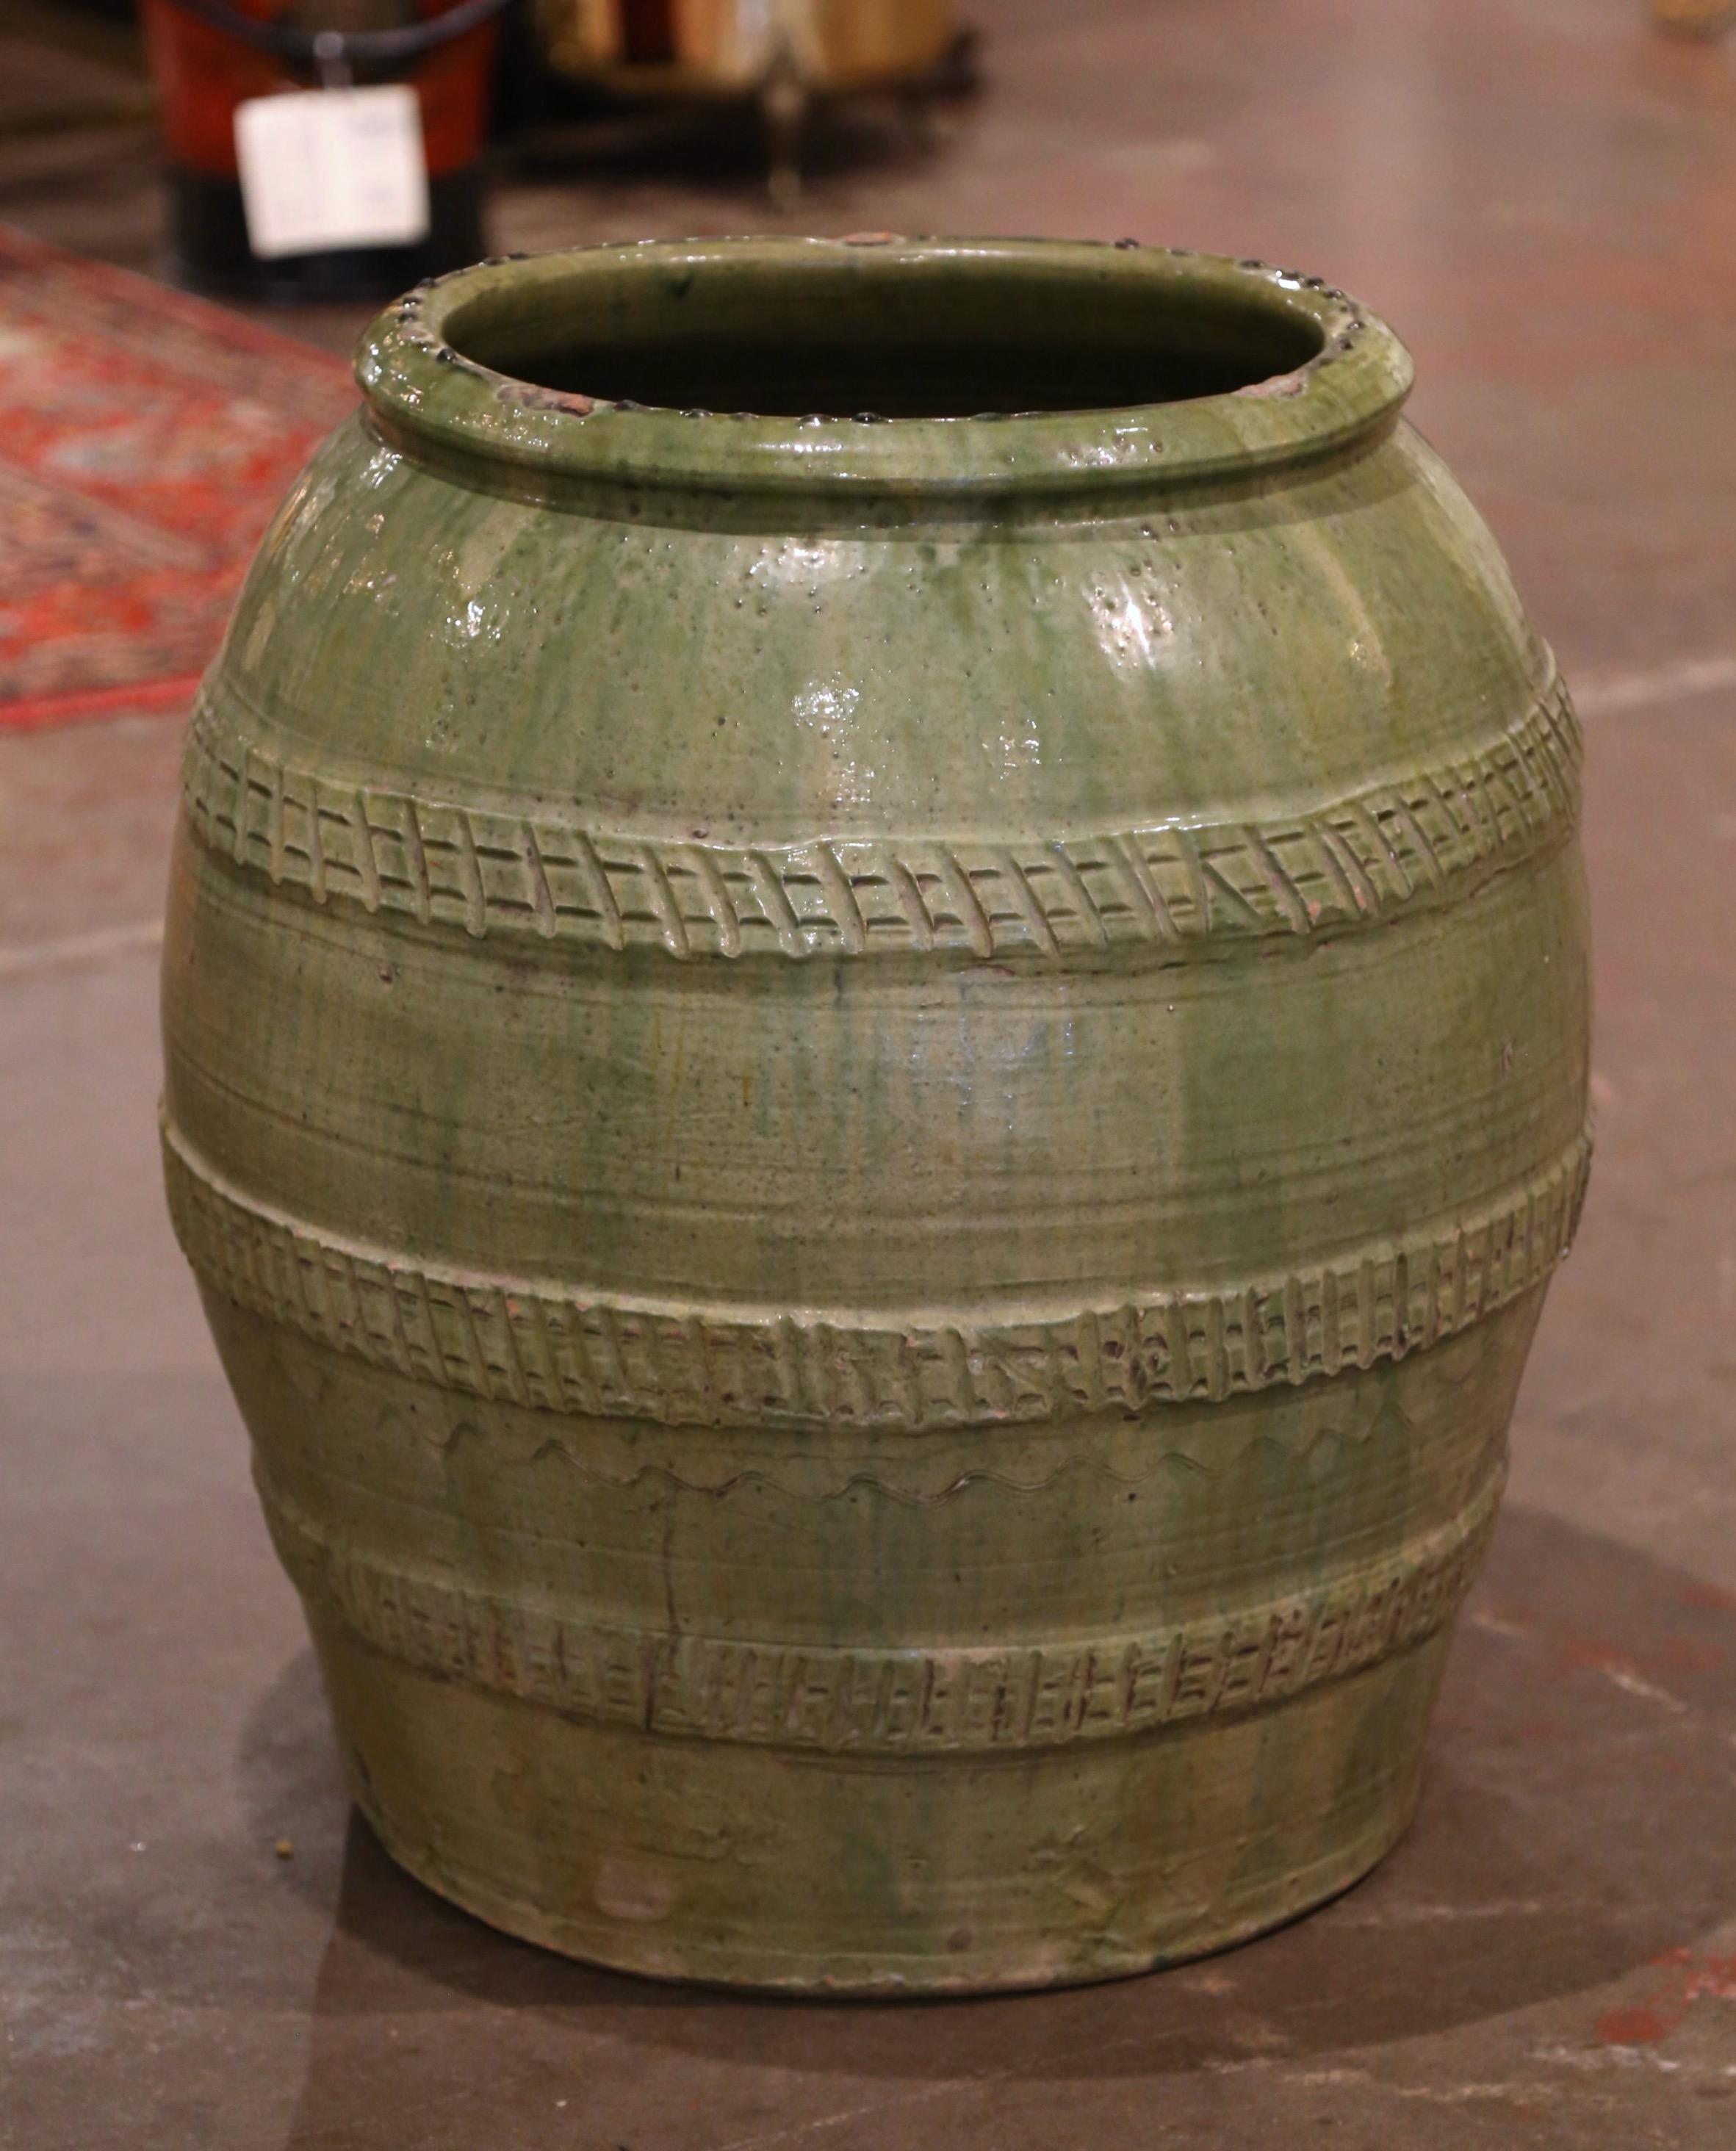 This large, antique earthenware jar was hand made in Southern France, circa 1870. Built of clay and finished with the traditional Provencal green glaze throughout, the terracotta pot is round in shape with a thick rim at the top, and decorated with